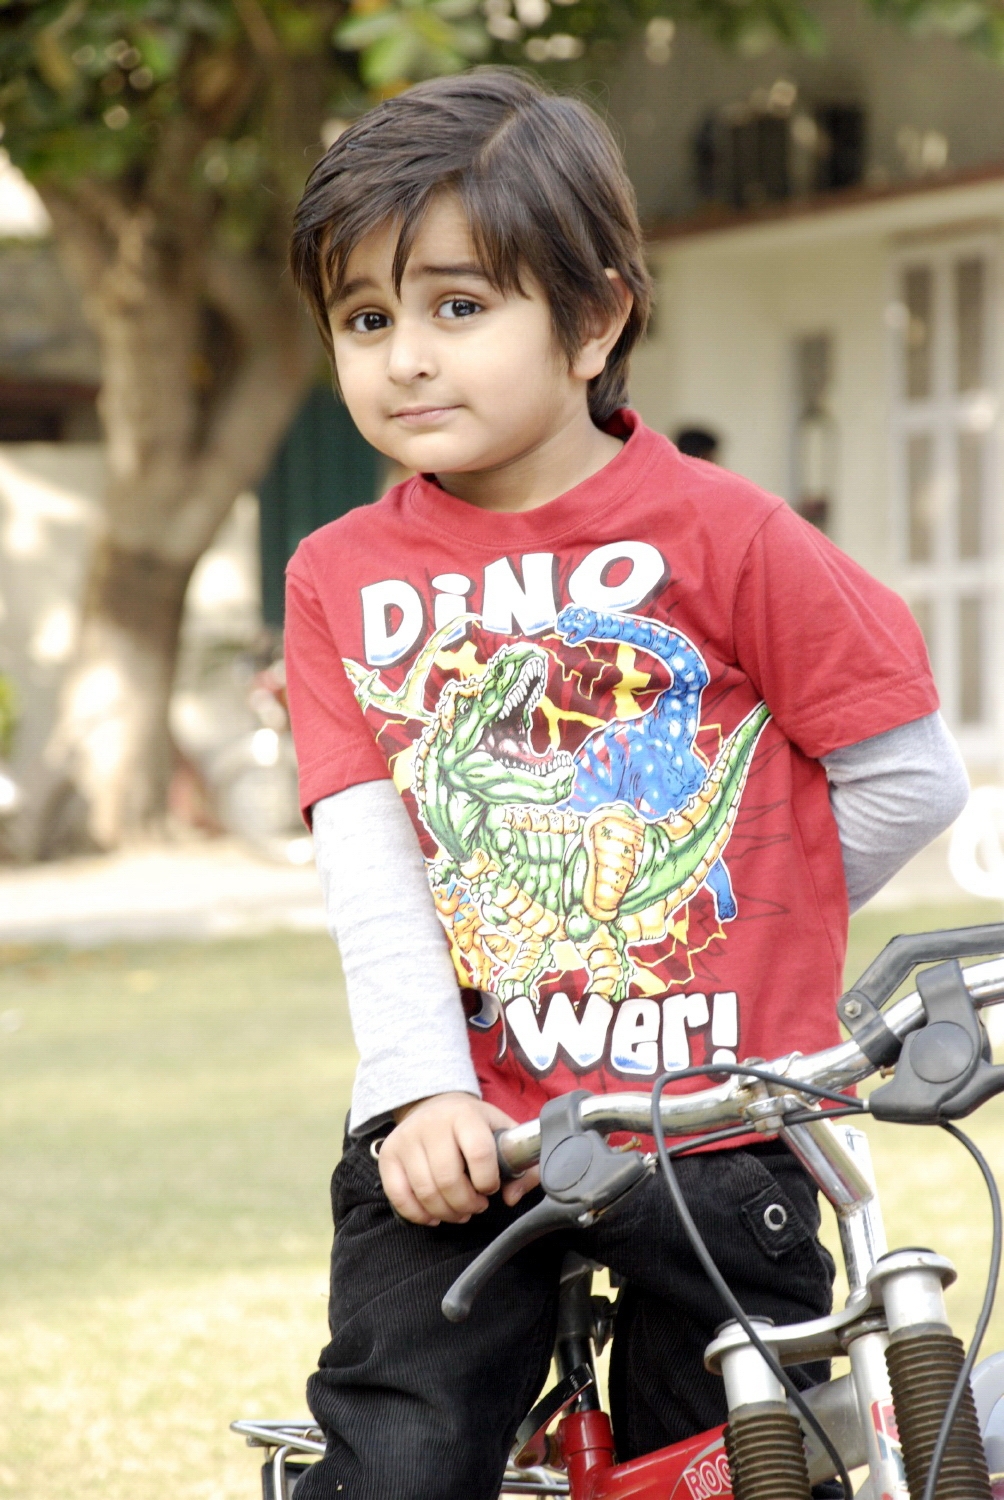 Cute kid with bicycle photo